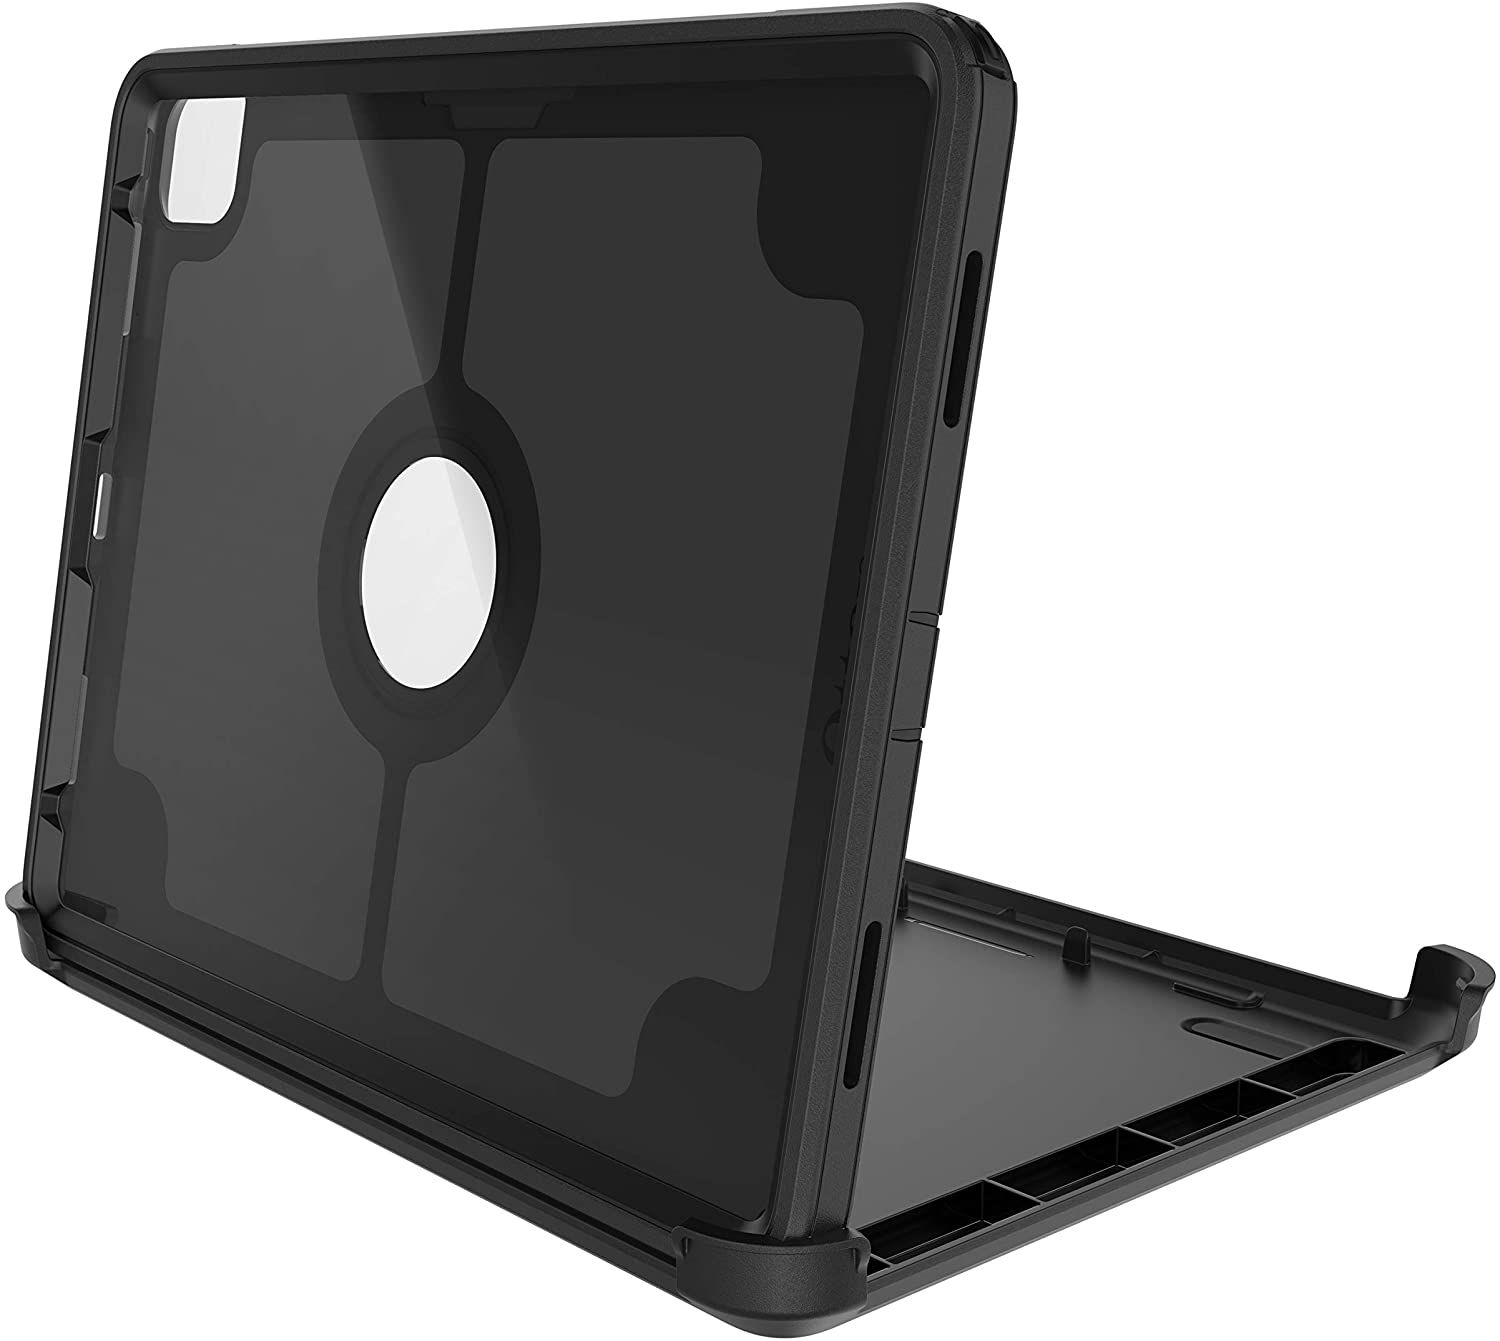 OtterBox Defender Series Case for IPAD PRO 12.9 3